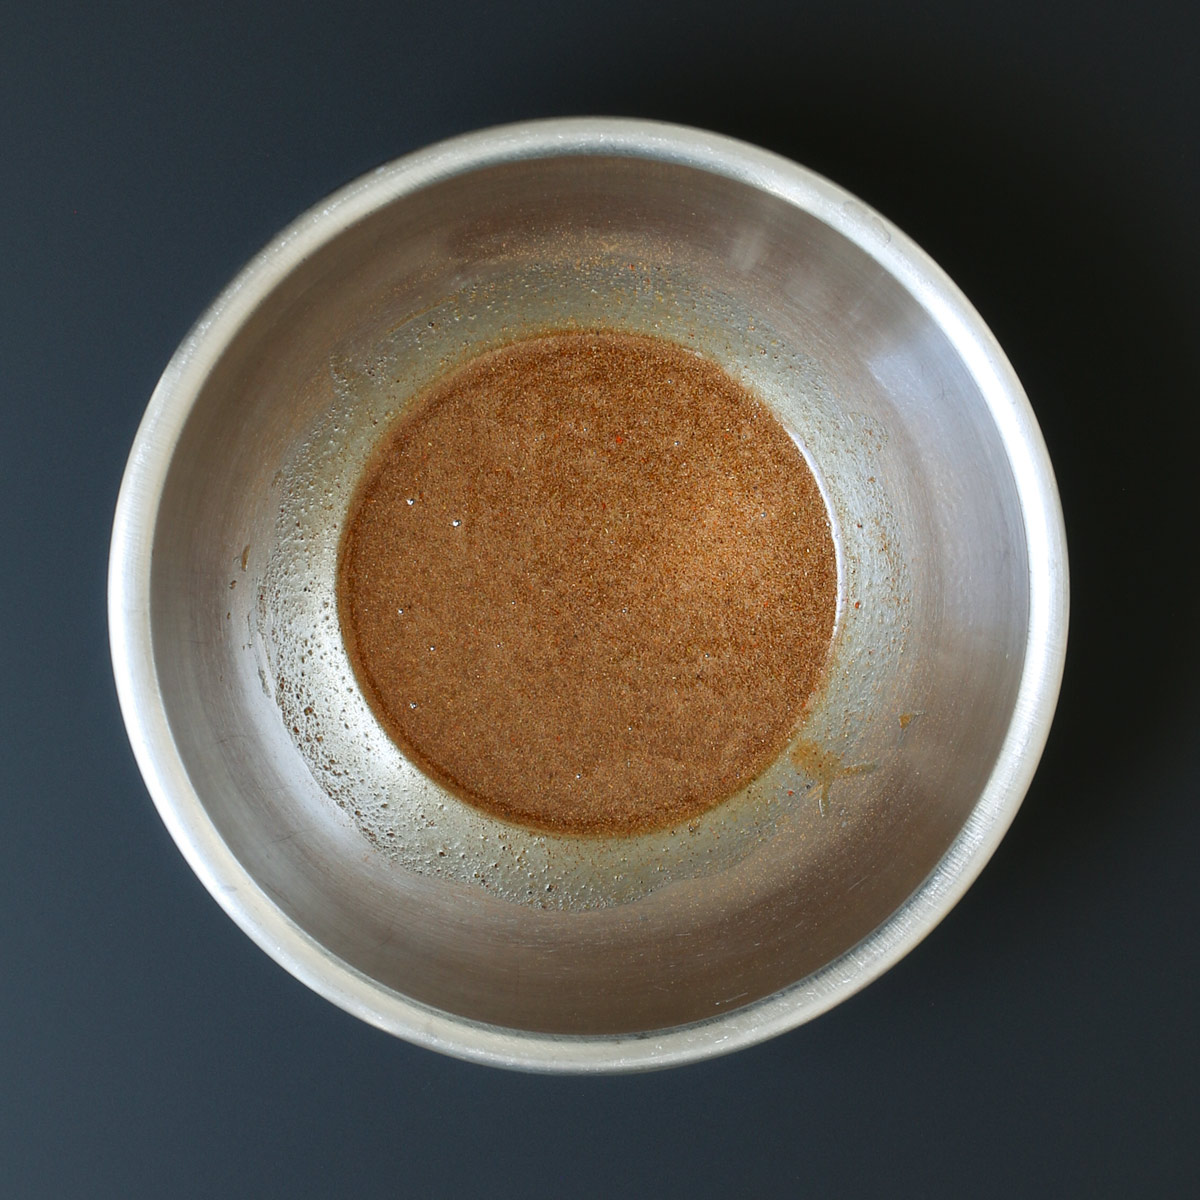 spice-syrup mixture in bowl.